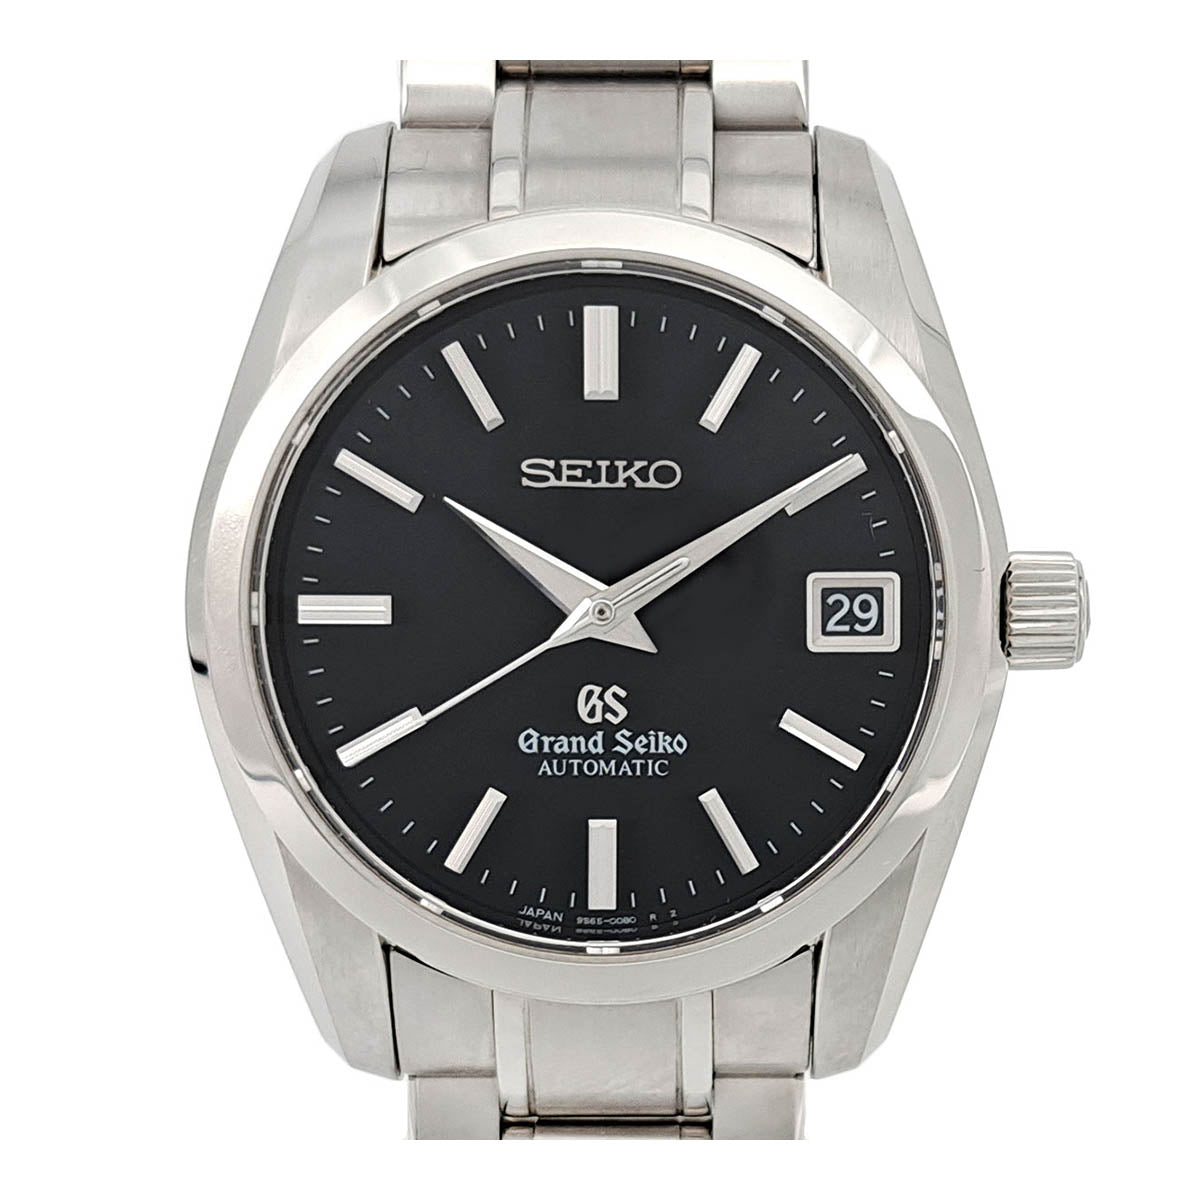 SEIKO Grand Seiko Mechanical SBGR053 Automatic Stainless Steel Men's Watch (Pre-Owned) SBGR053